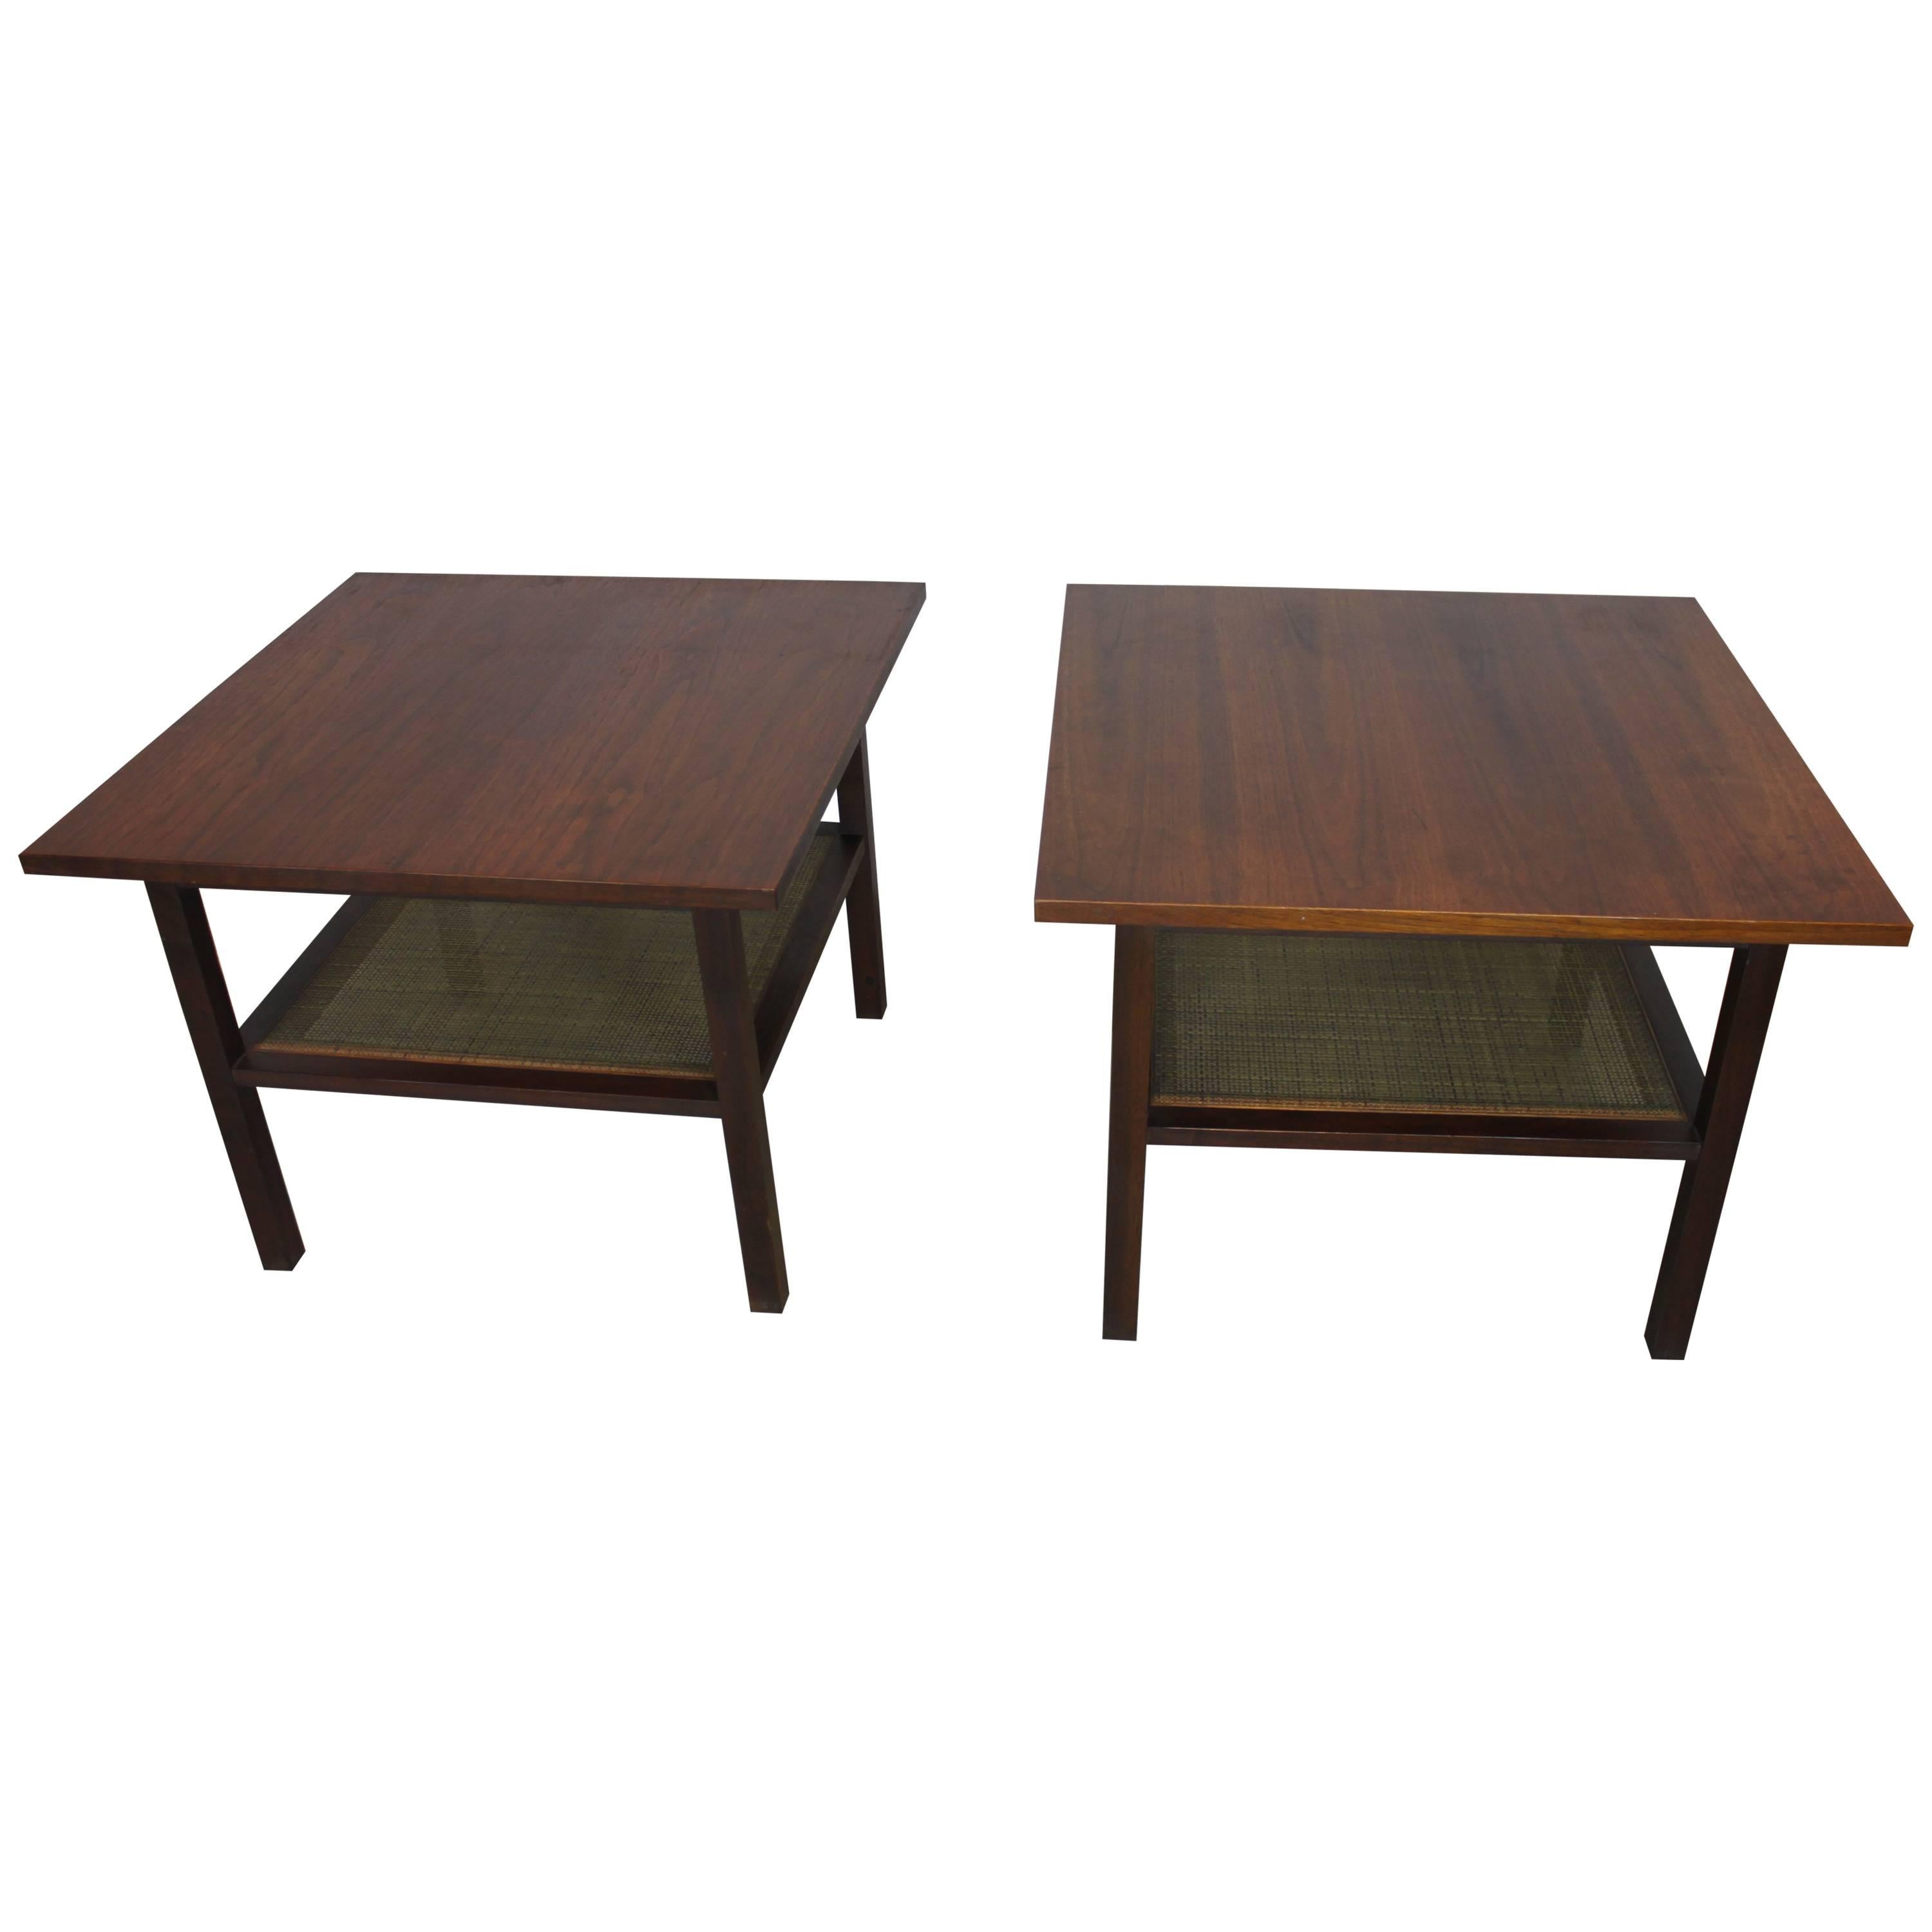 Pair of Mid-Century Modern Walnut Rosewood End Tables For Sale